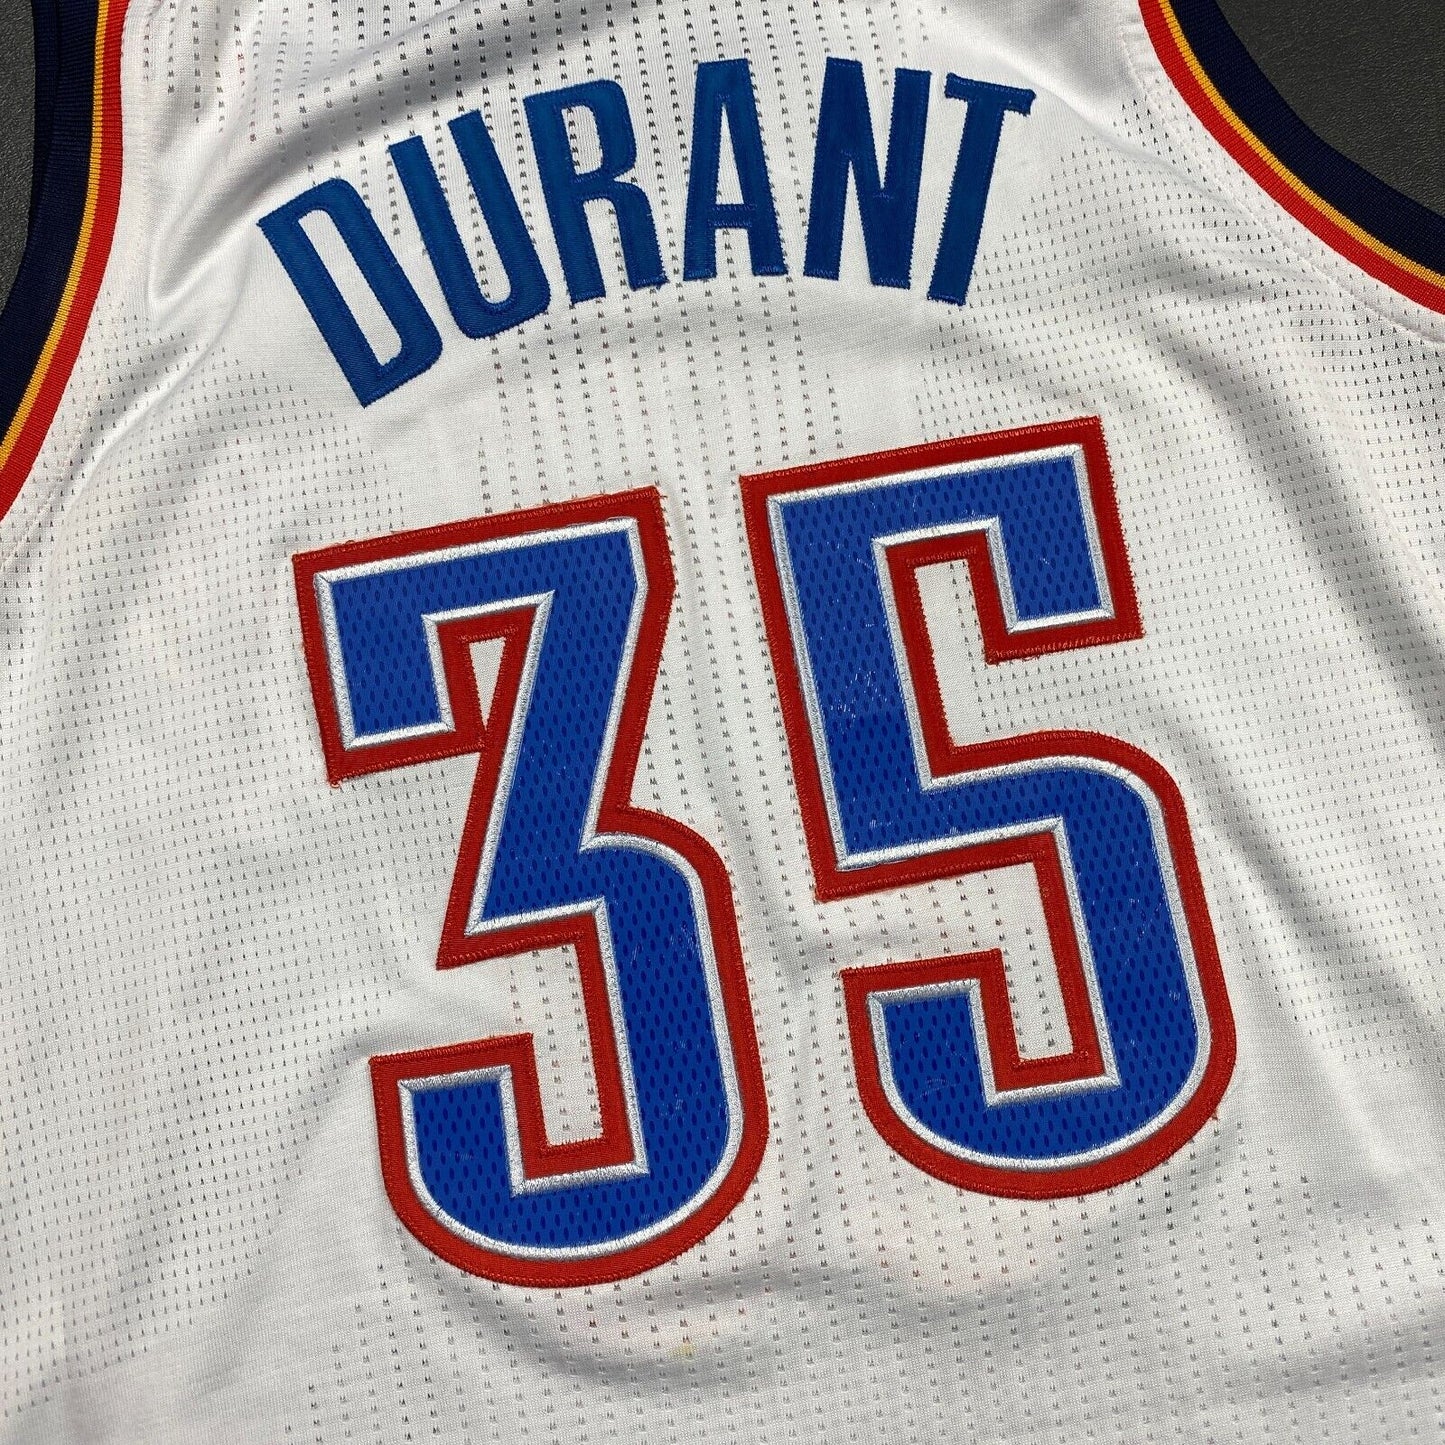 100% Authentic Kevin Durant Adidas Thunders 2012 NBA Finals Jersey Size L Mens